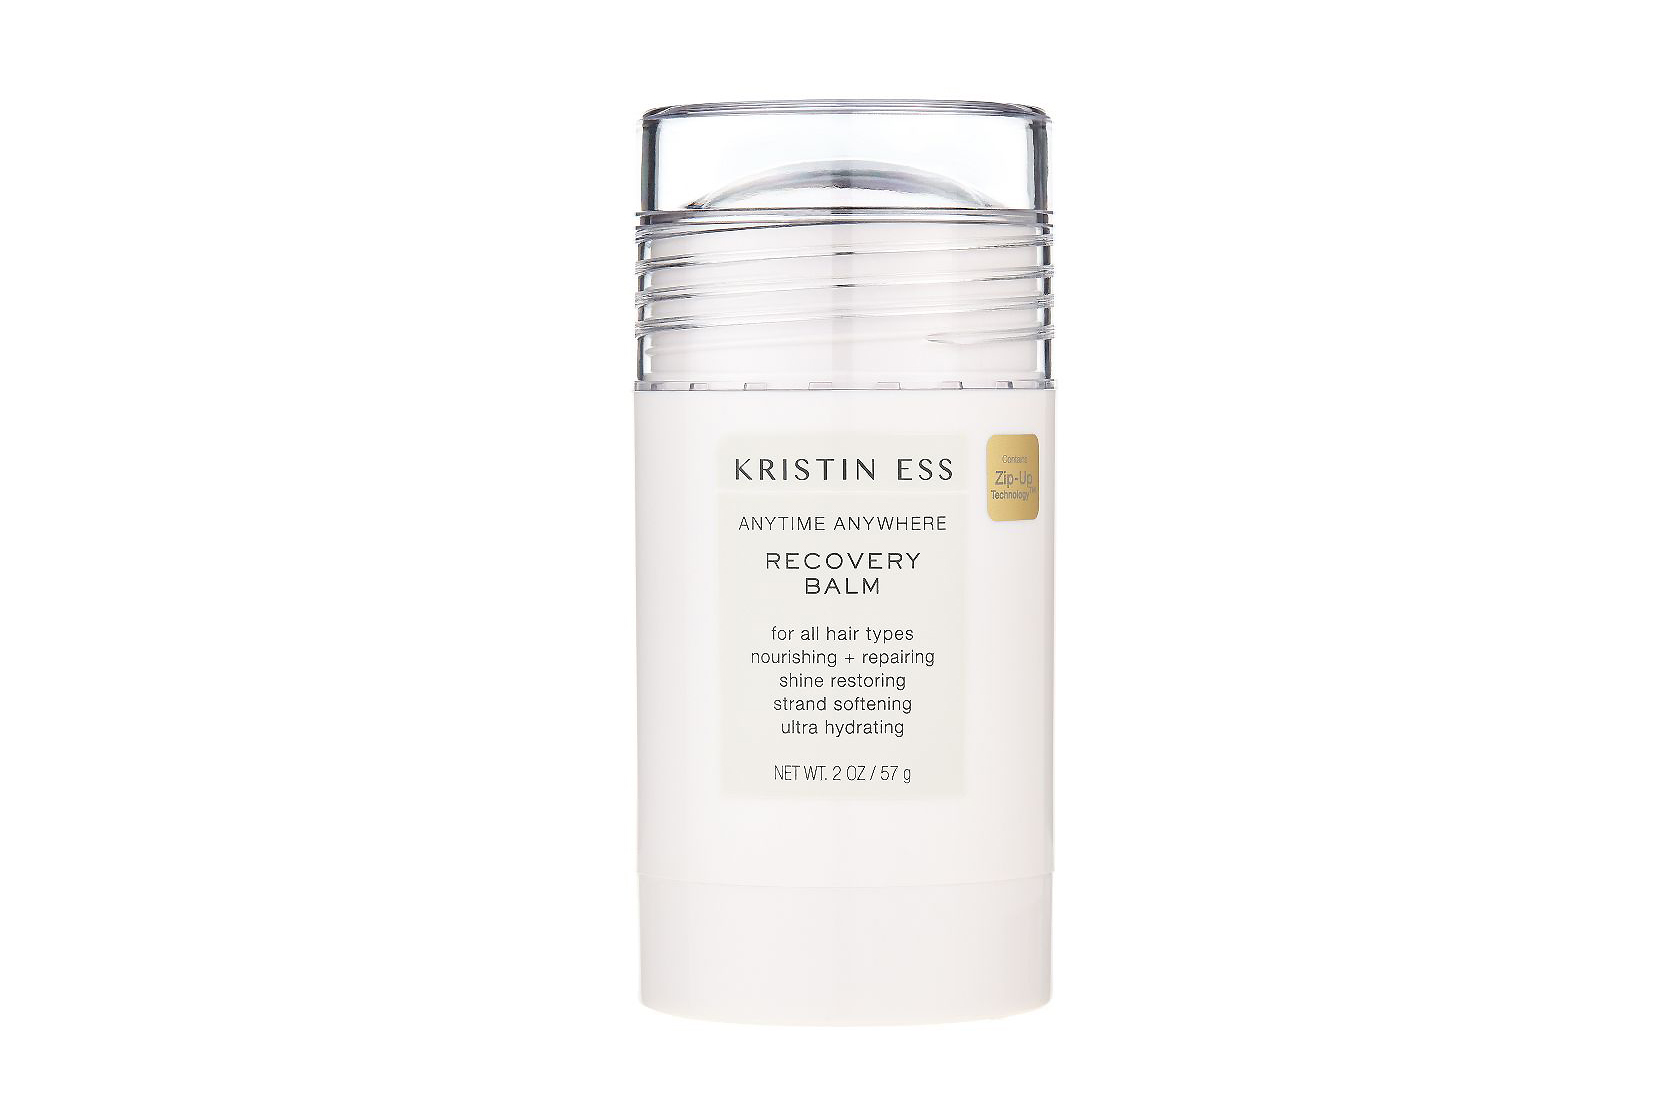 kristin ess anytime anywhere recovery balm review